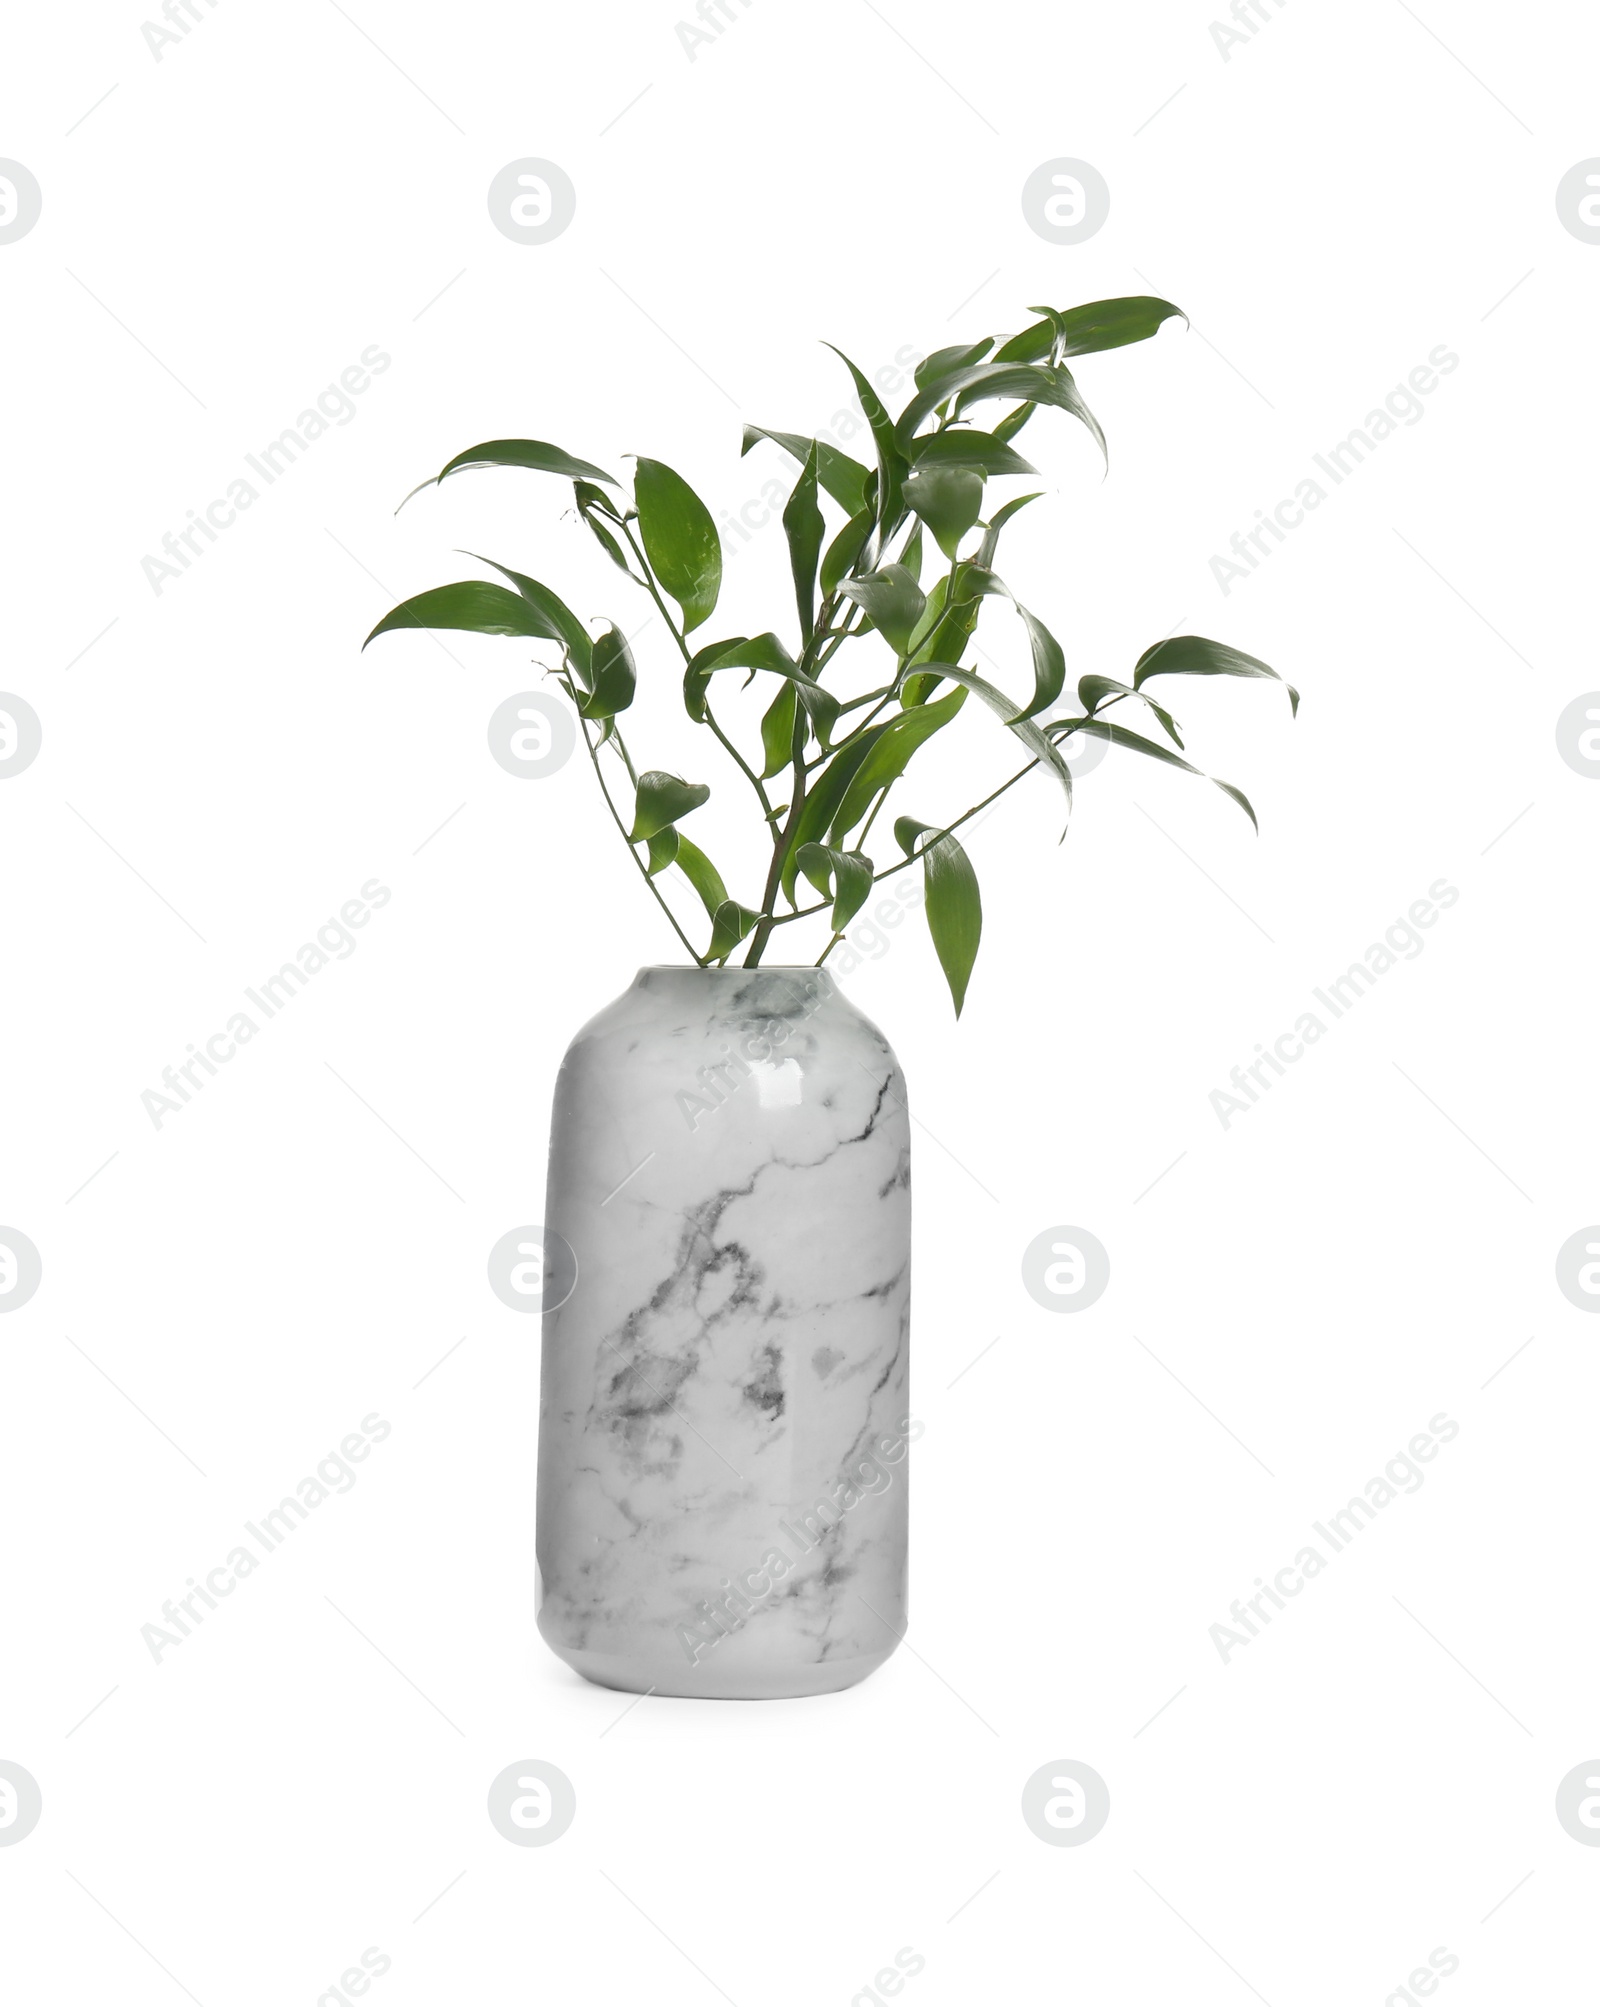 Photo of Branches with green leaves in vase isolated on white